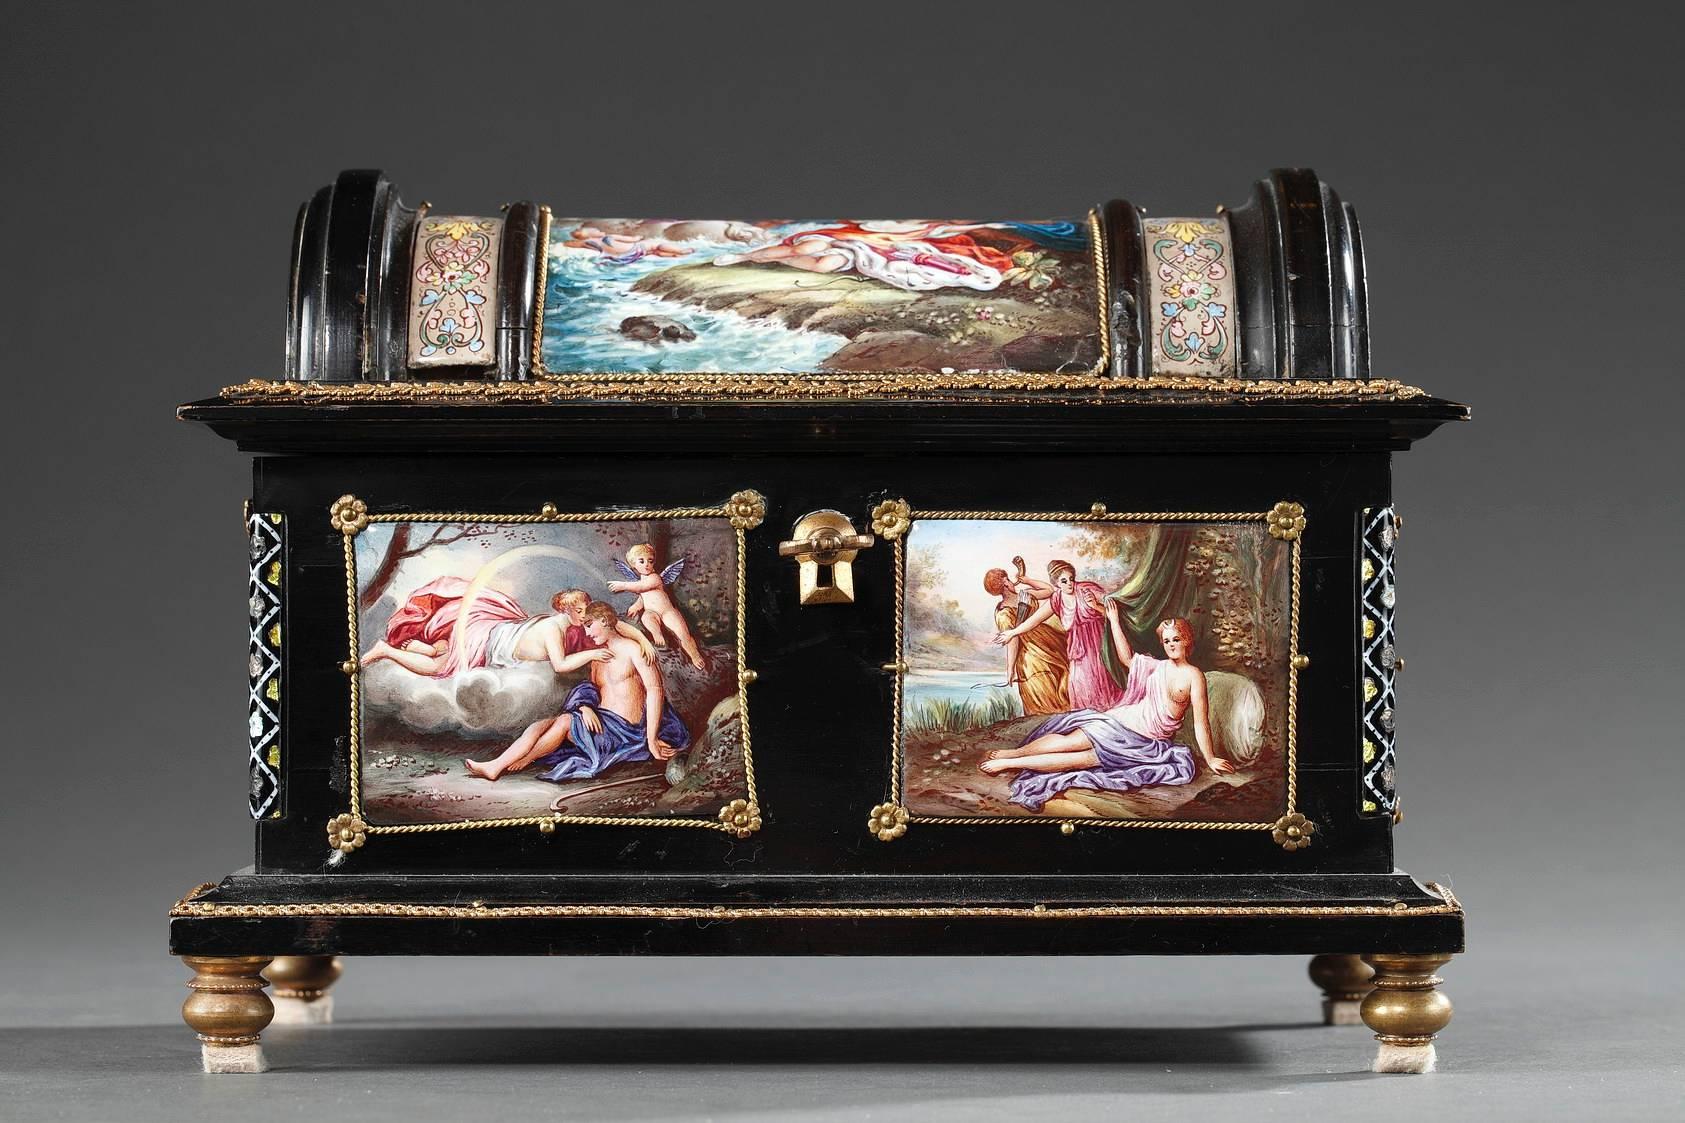 Louis XVI Enamel Coffer with Mythological Scenes Signed Klein in Paris, 19th Century For Sale